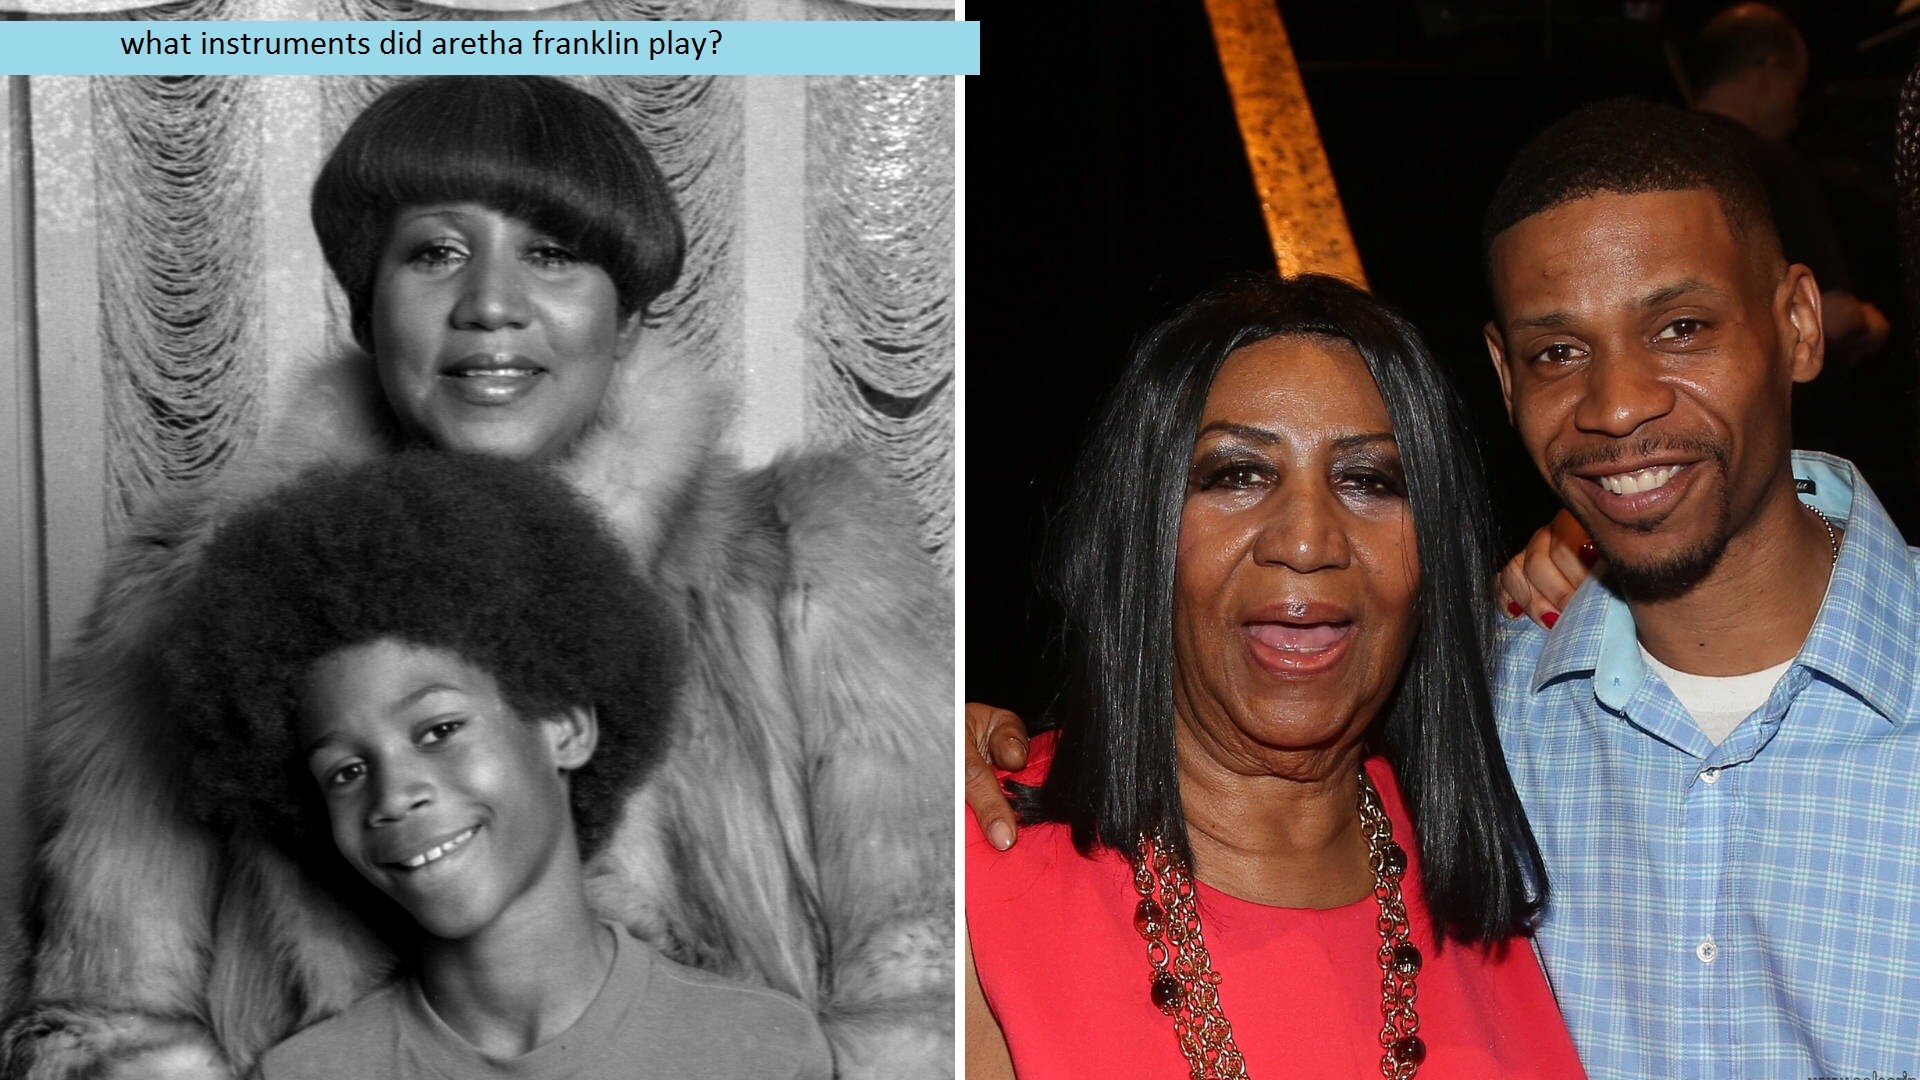 what instruments did aretha franklin play?